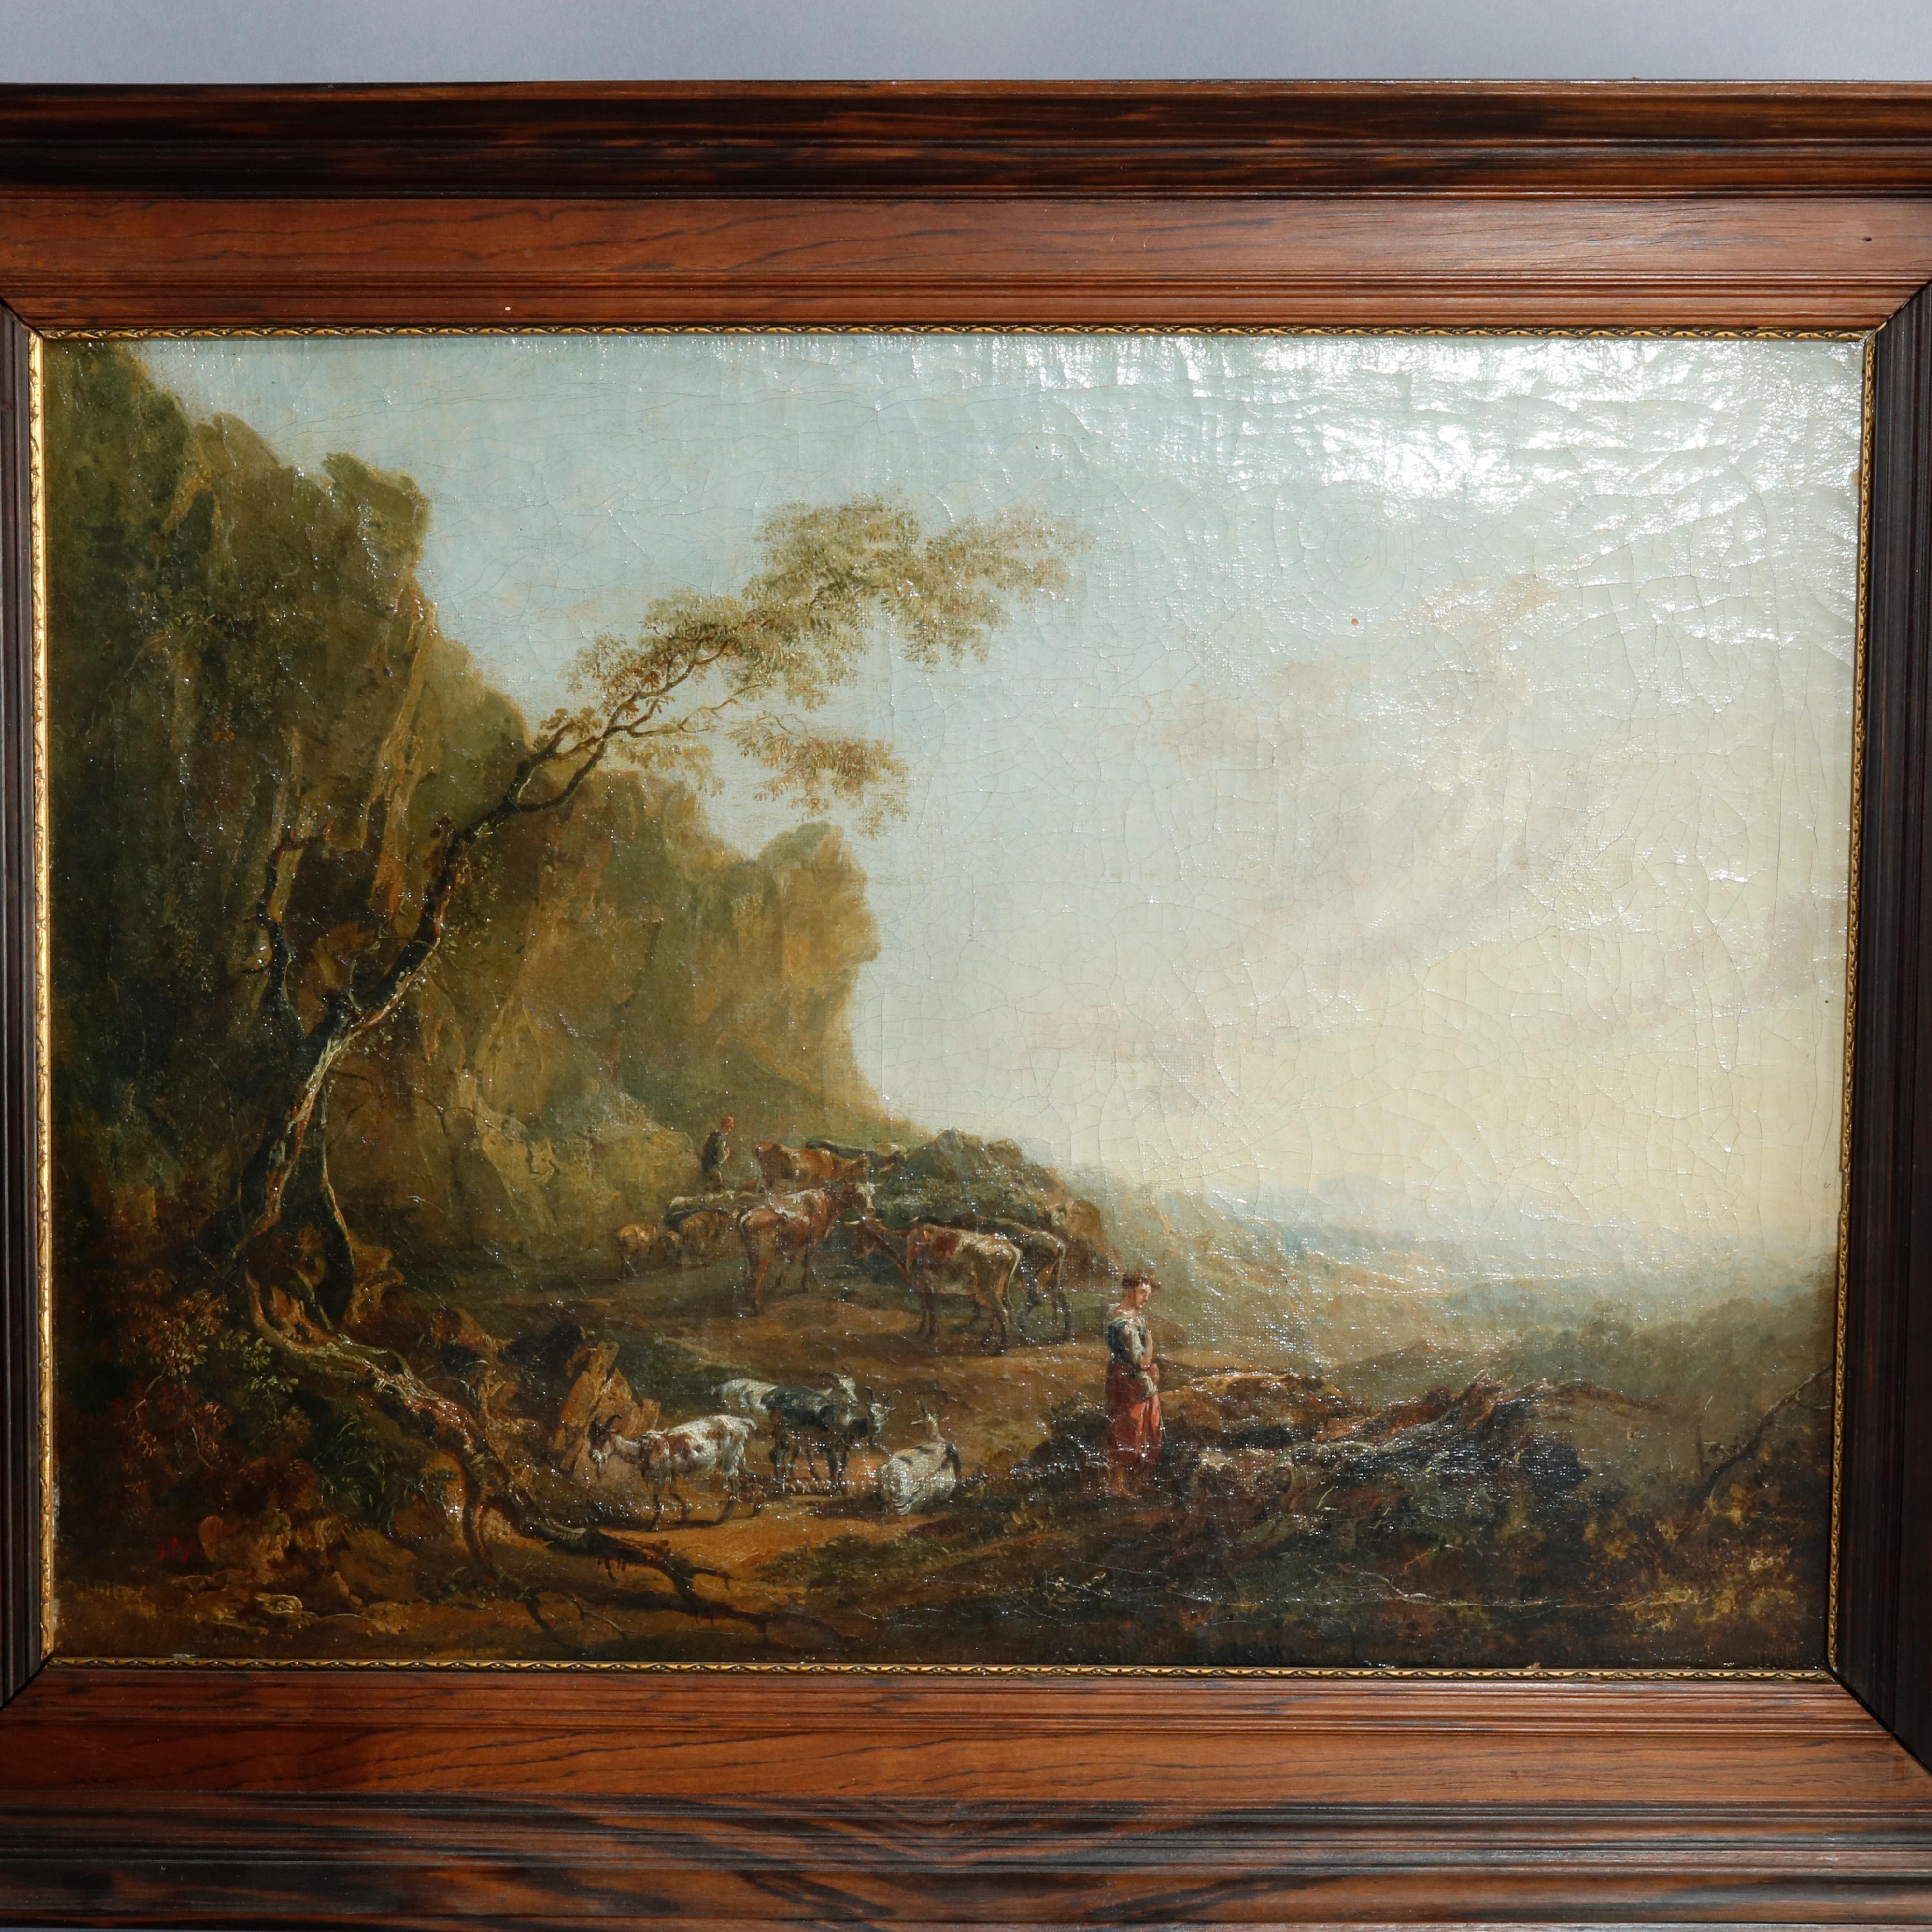 Carved Antique European Oil Painting, Landscape with Figures & Livestock, Mid-19th C